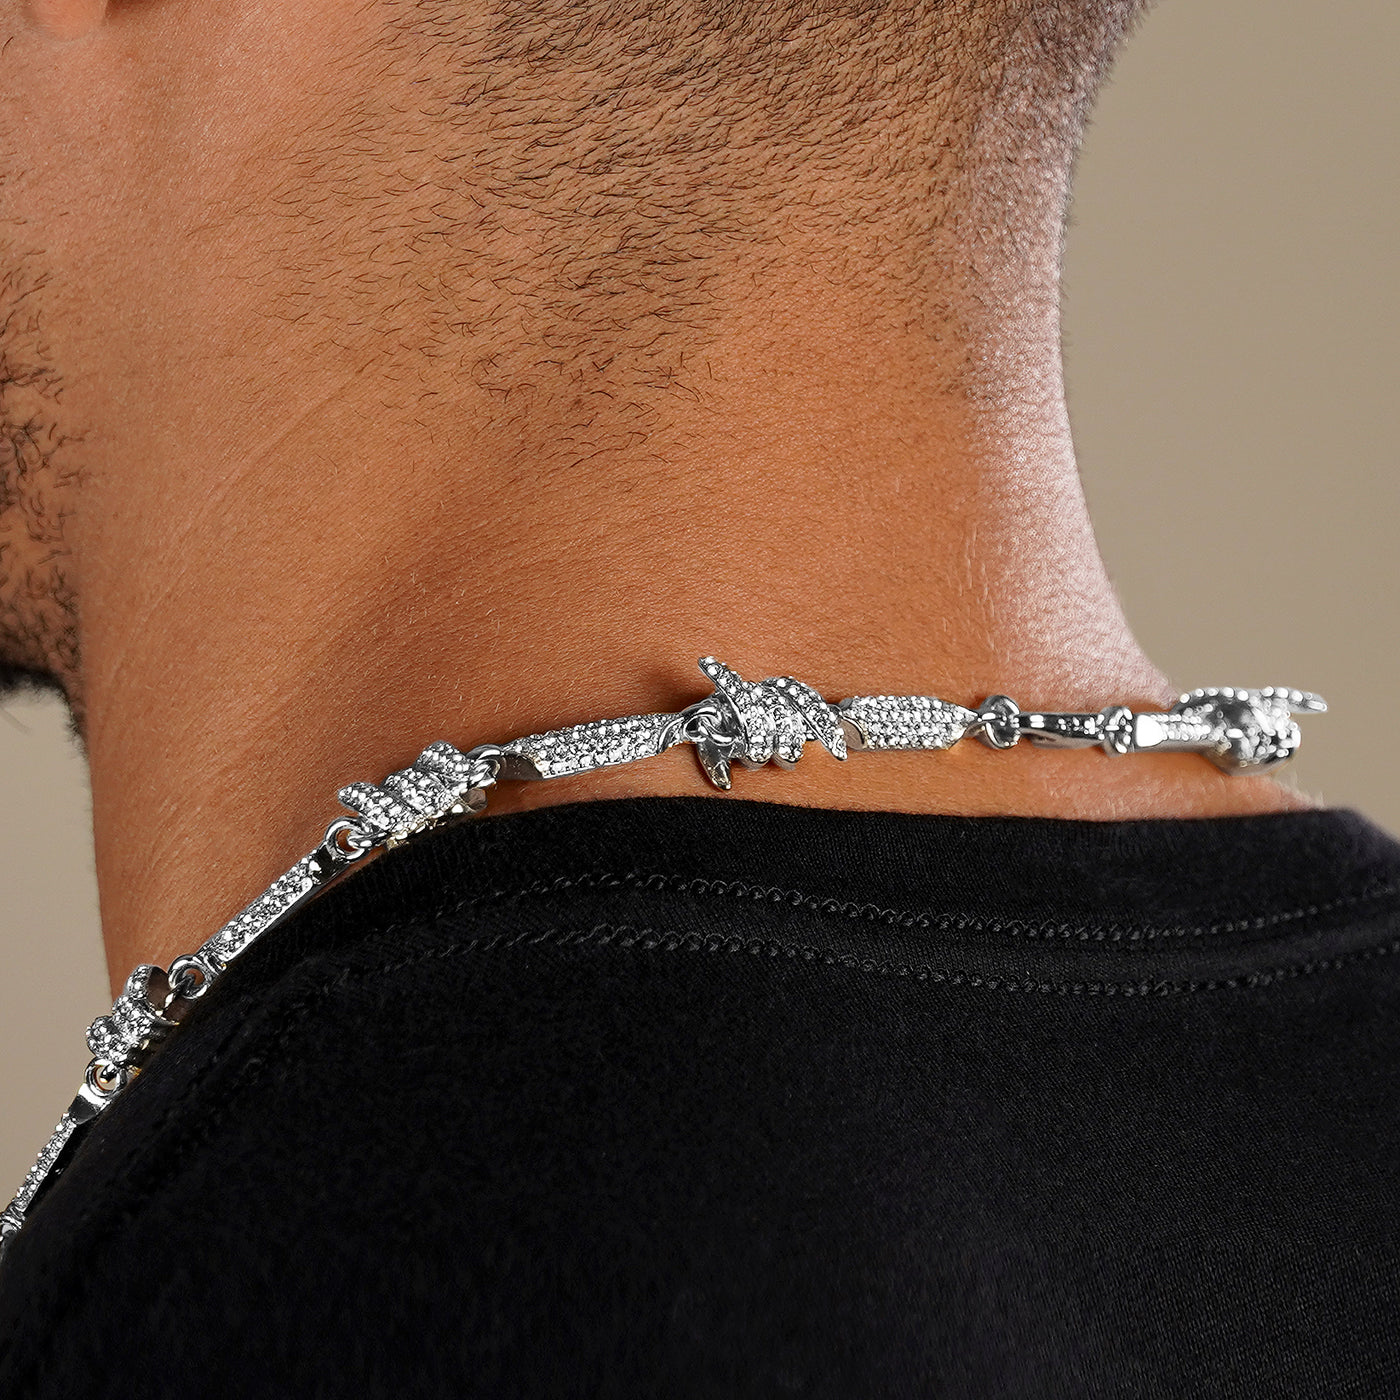 Iced Out Silver Barbed Wire Chain Necklace (24 inches)